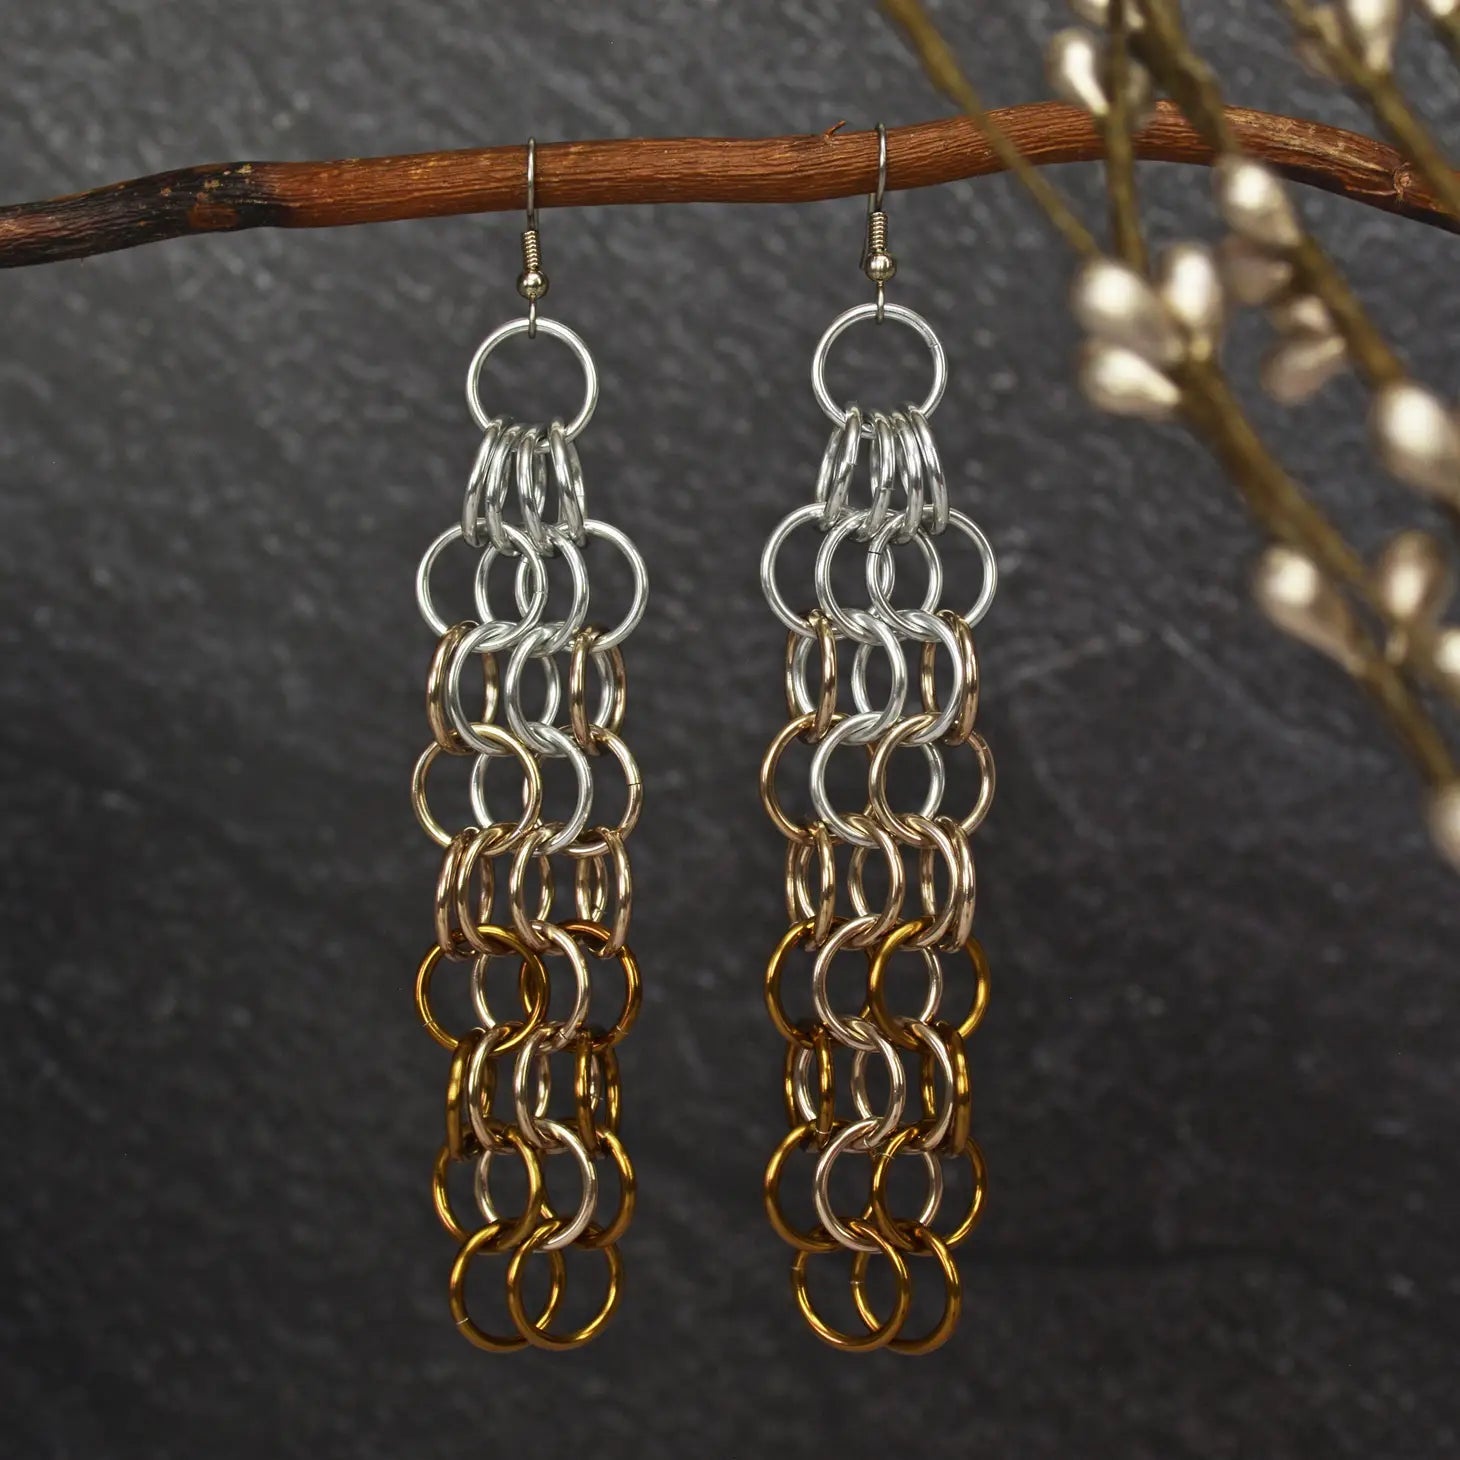 Ombre Chainmail Mesh Earrings - Sunset or Granite - dom+bomb